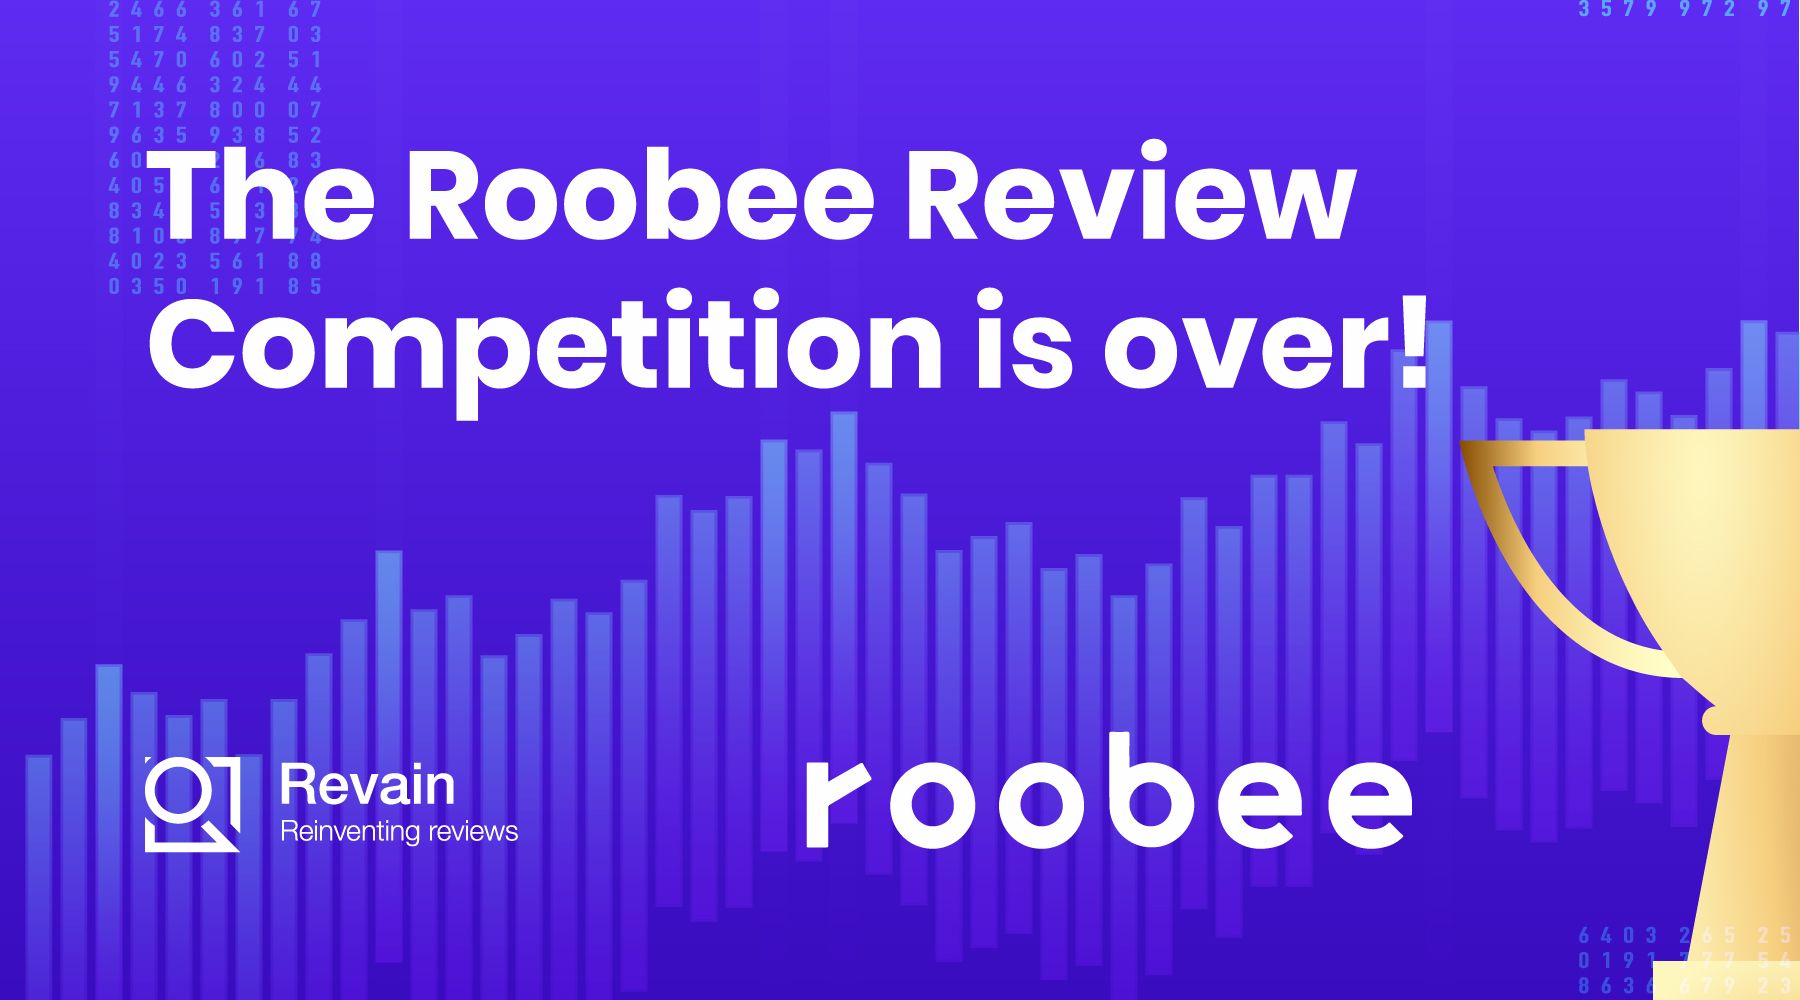 The Roobee Review Competition is over!